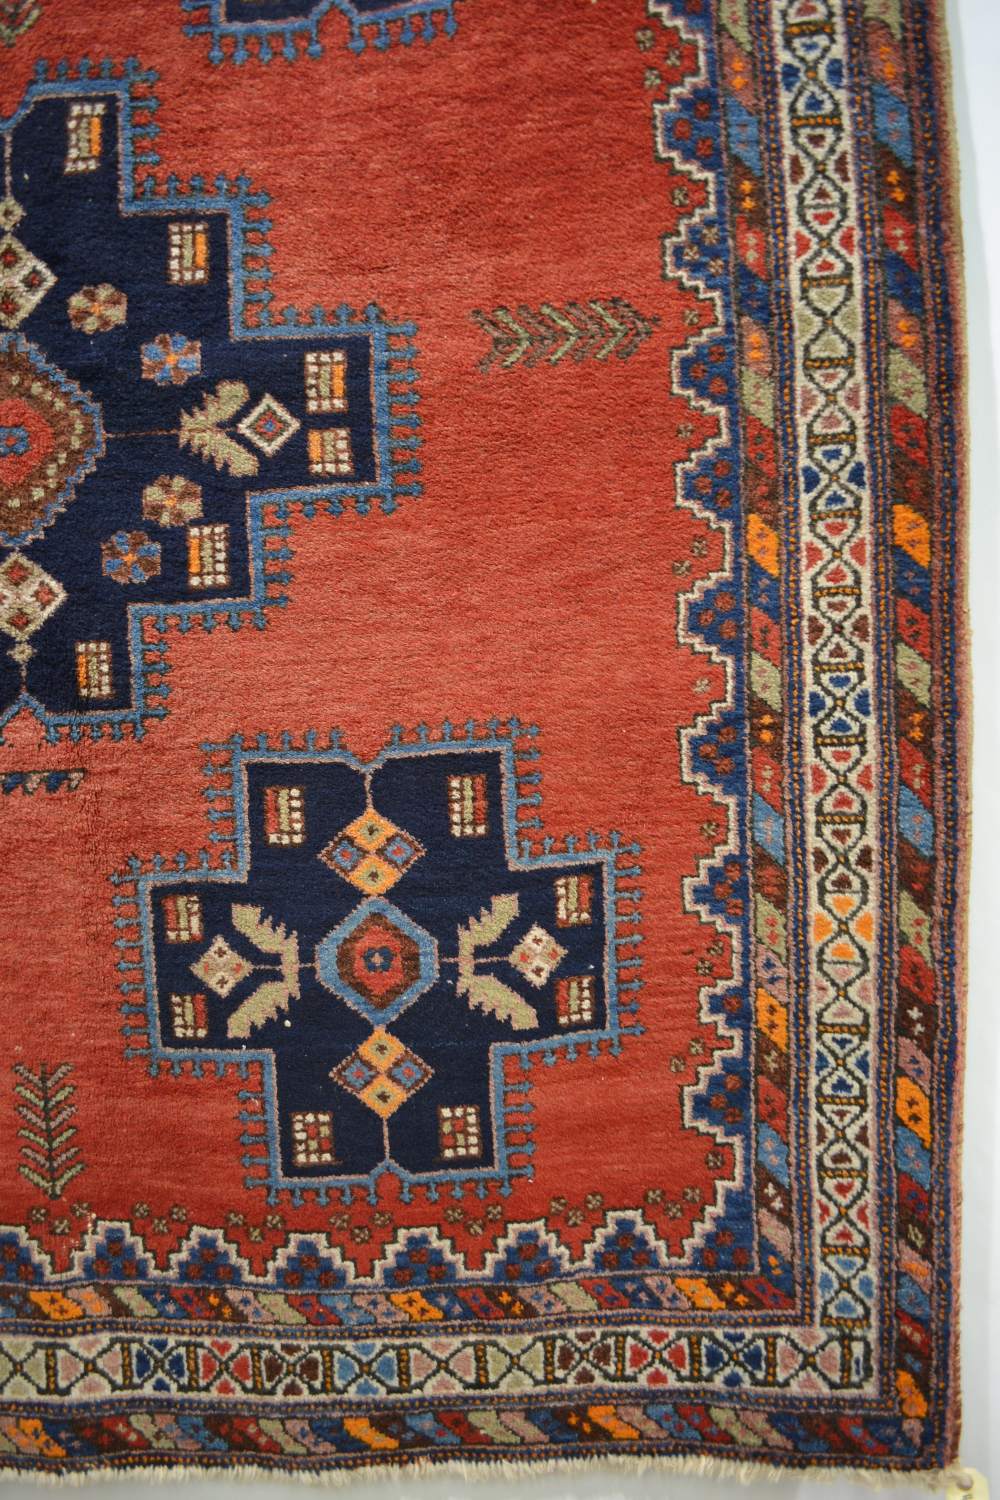 Afshar rug, Kerman area, south west Persia, about 1930s, 6ft. 1in. x 4ft. 11in. 1.86m. x 1.50m. - Image 2 of 3